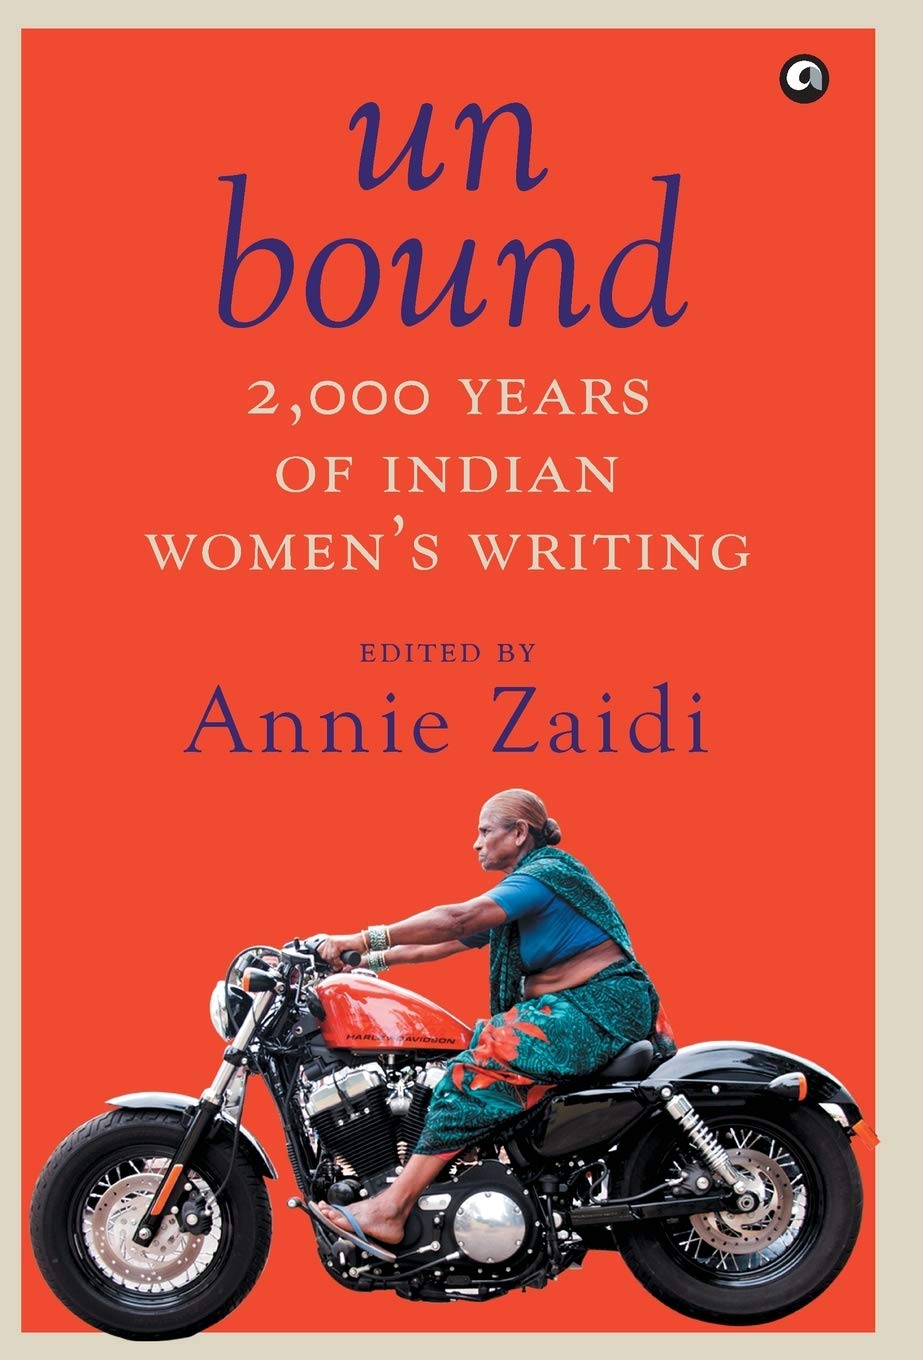 UNBOUND: 2,000 YEARS OF INDIAN WOMEN’S WRITING